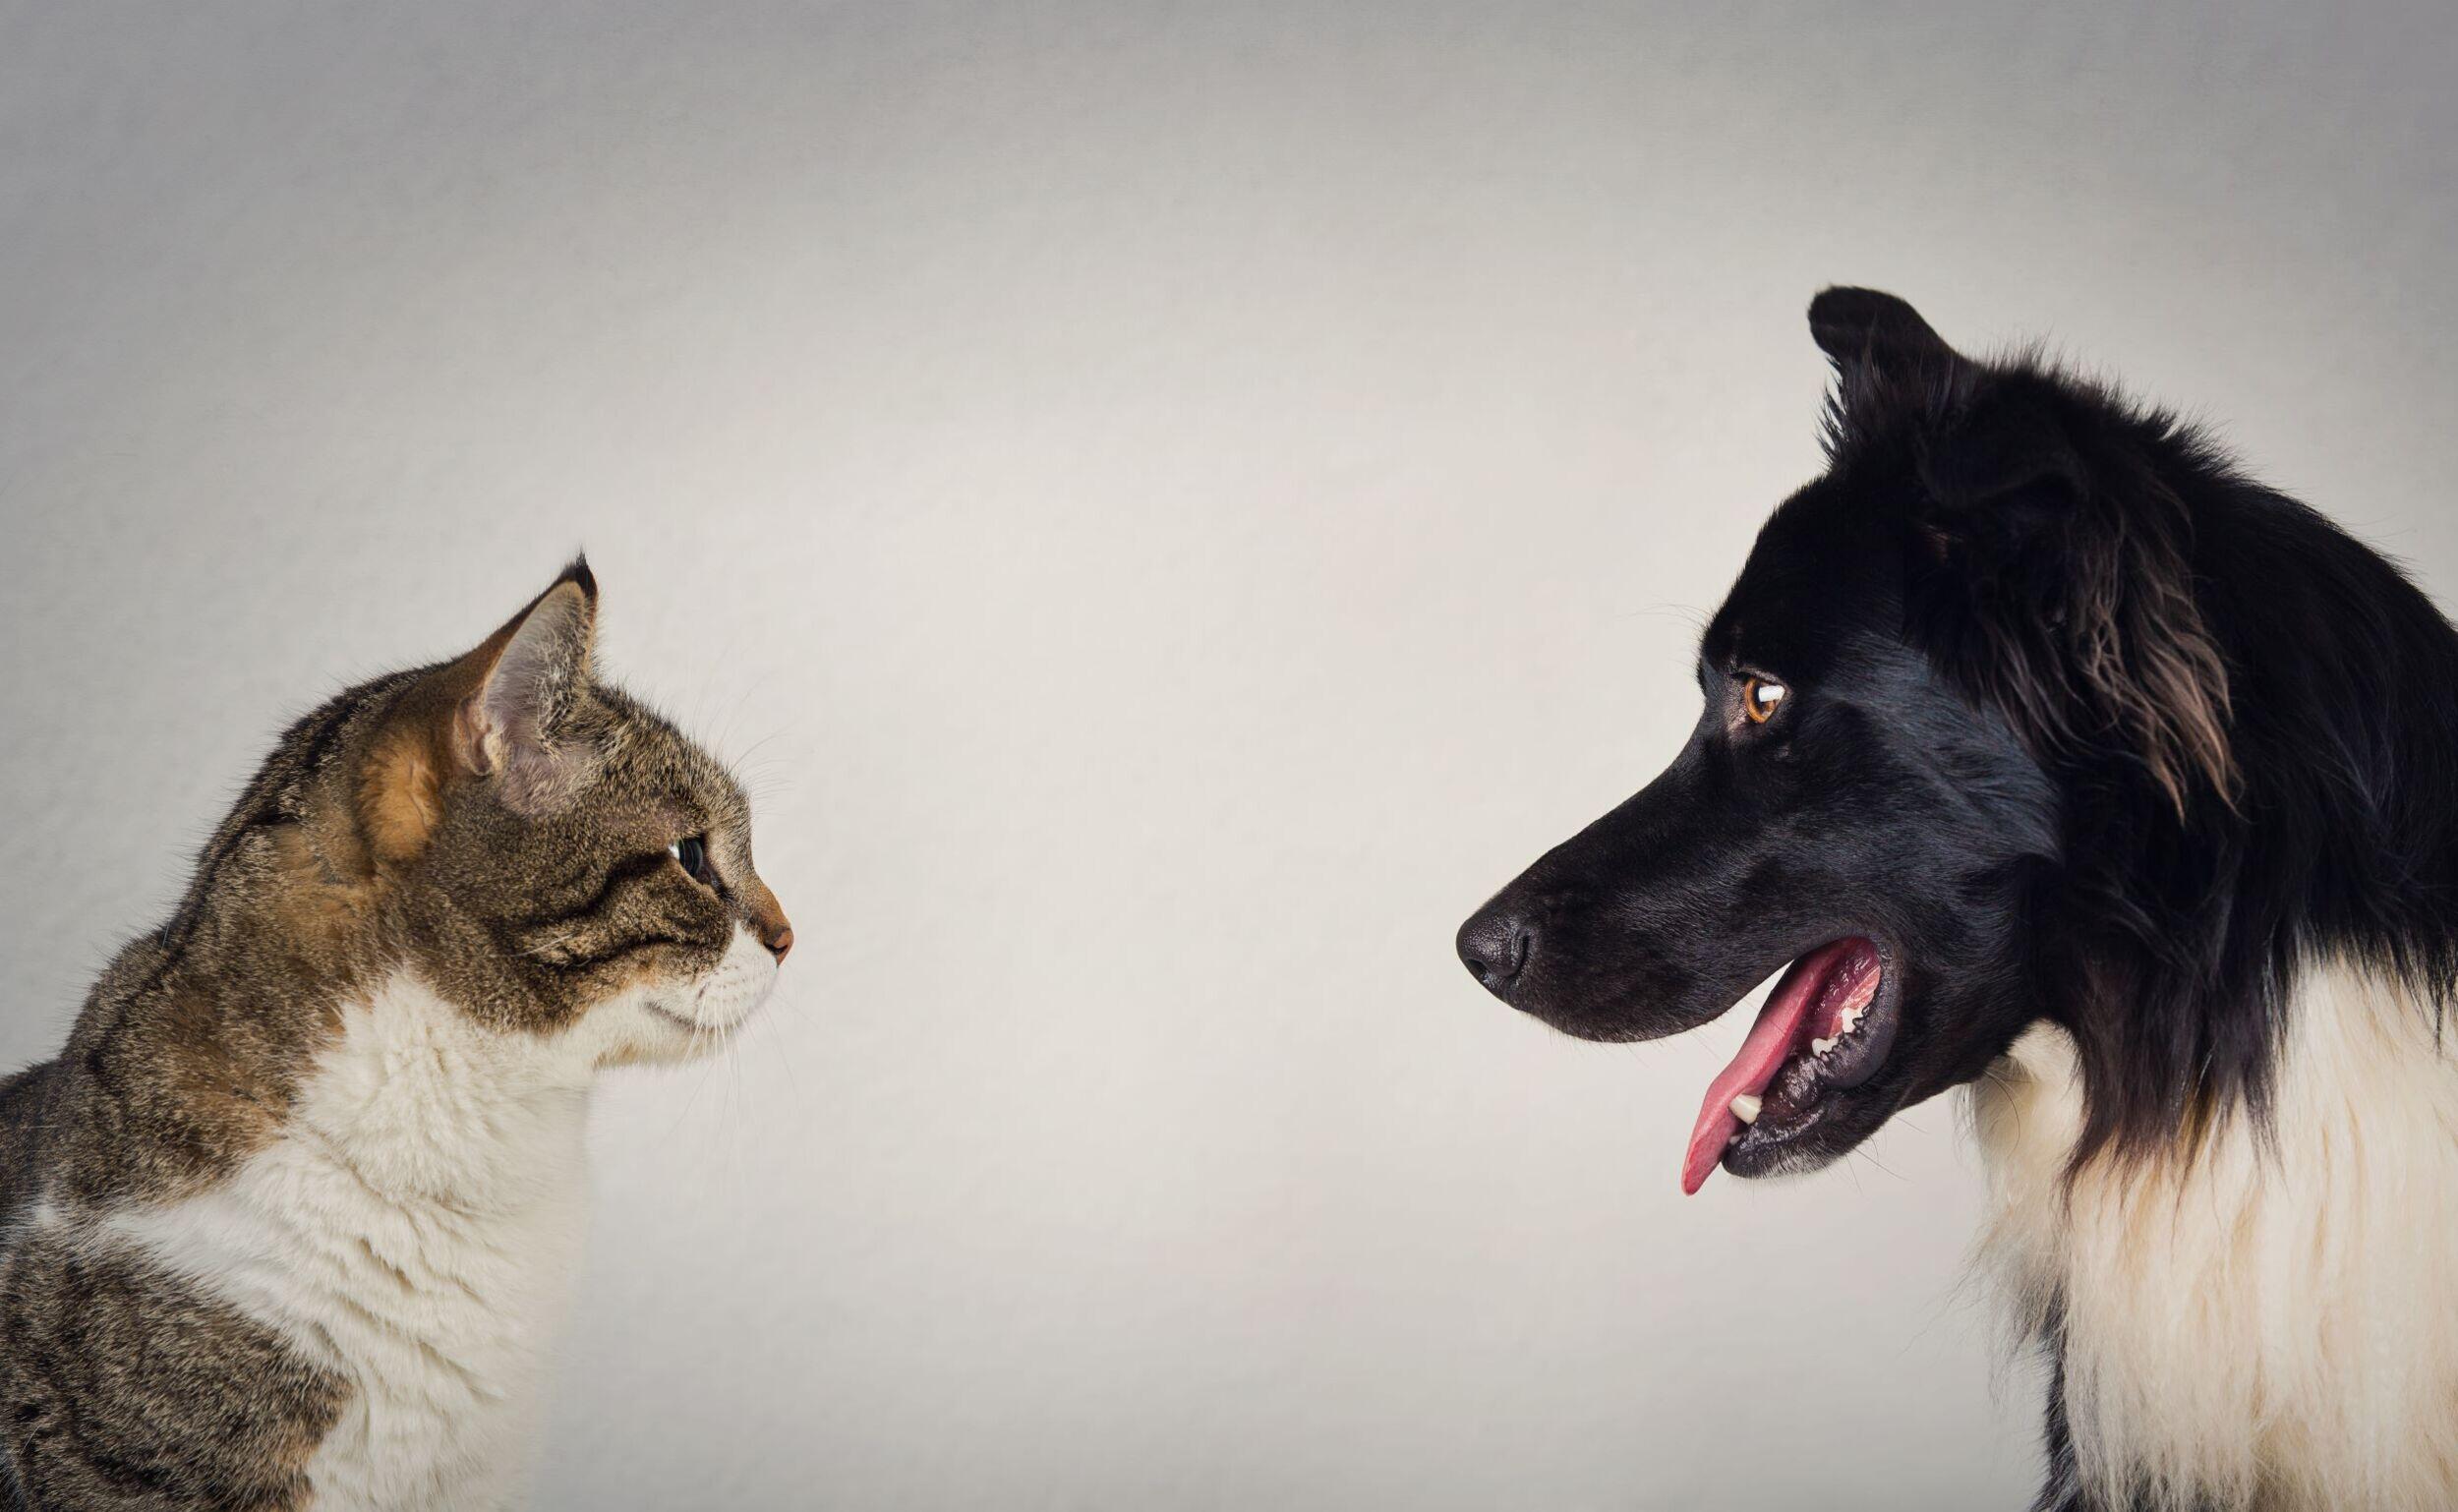 A cat and a dog staring at each other.